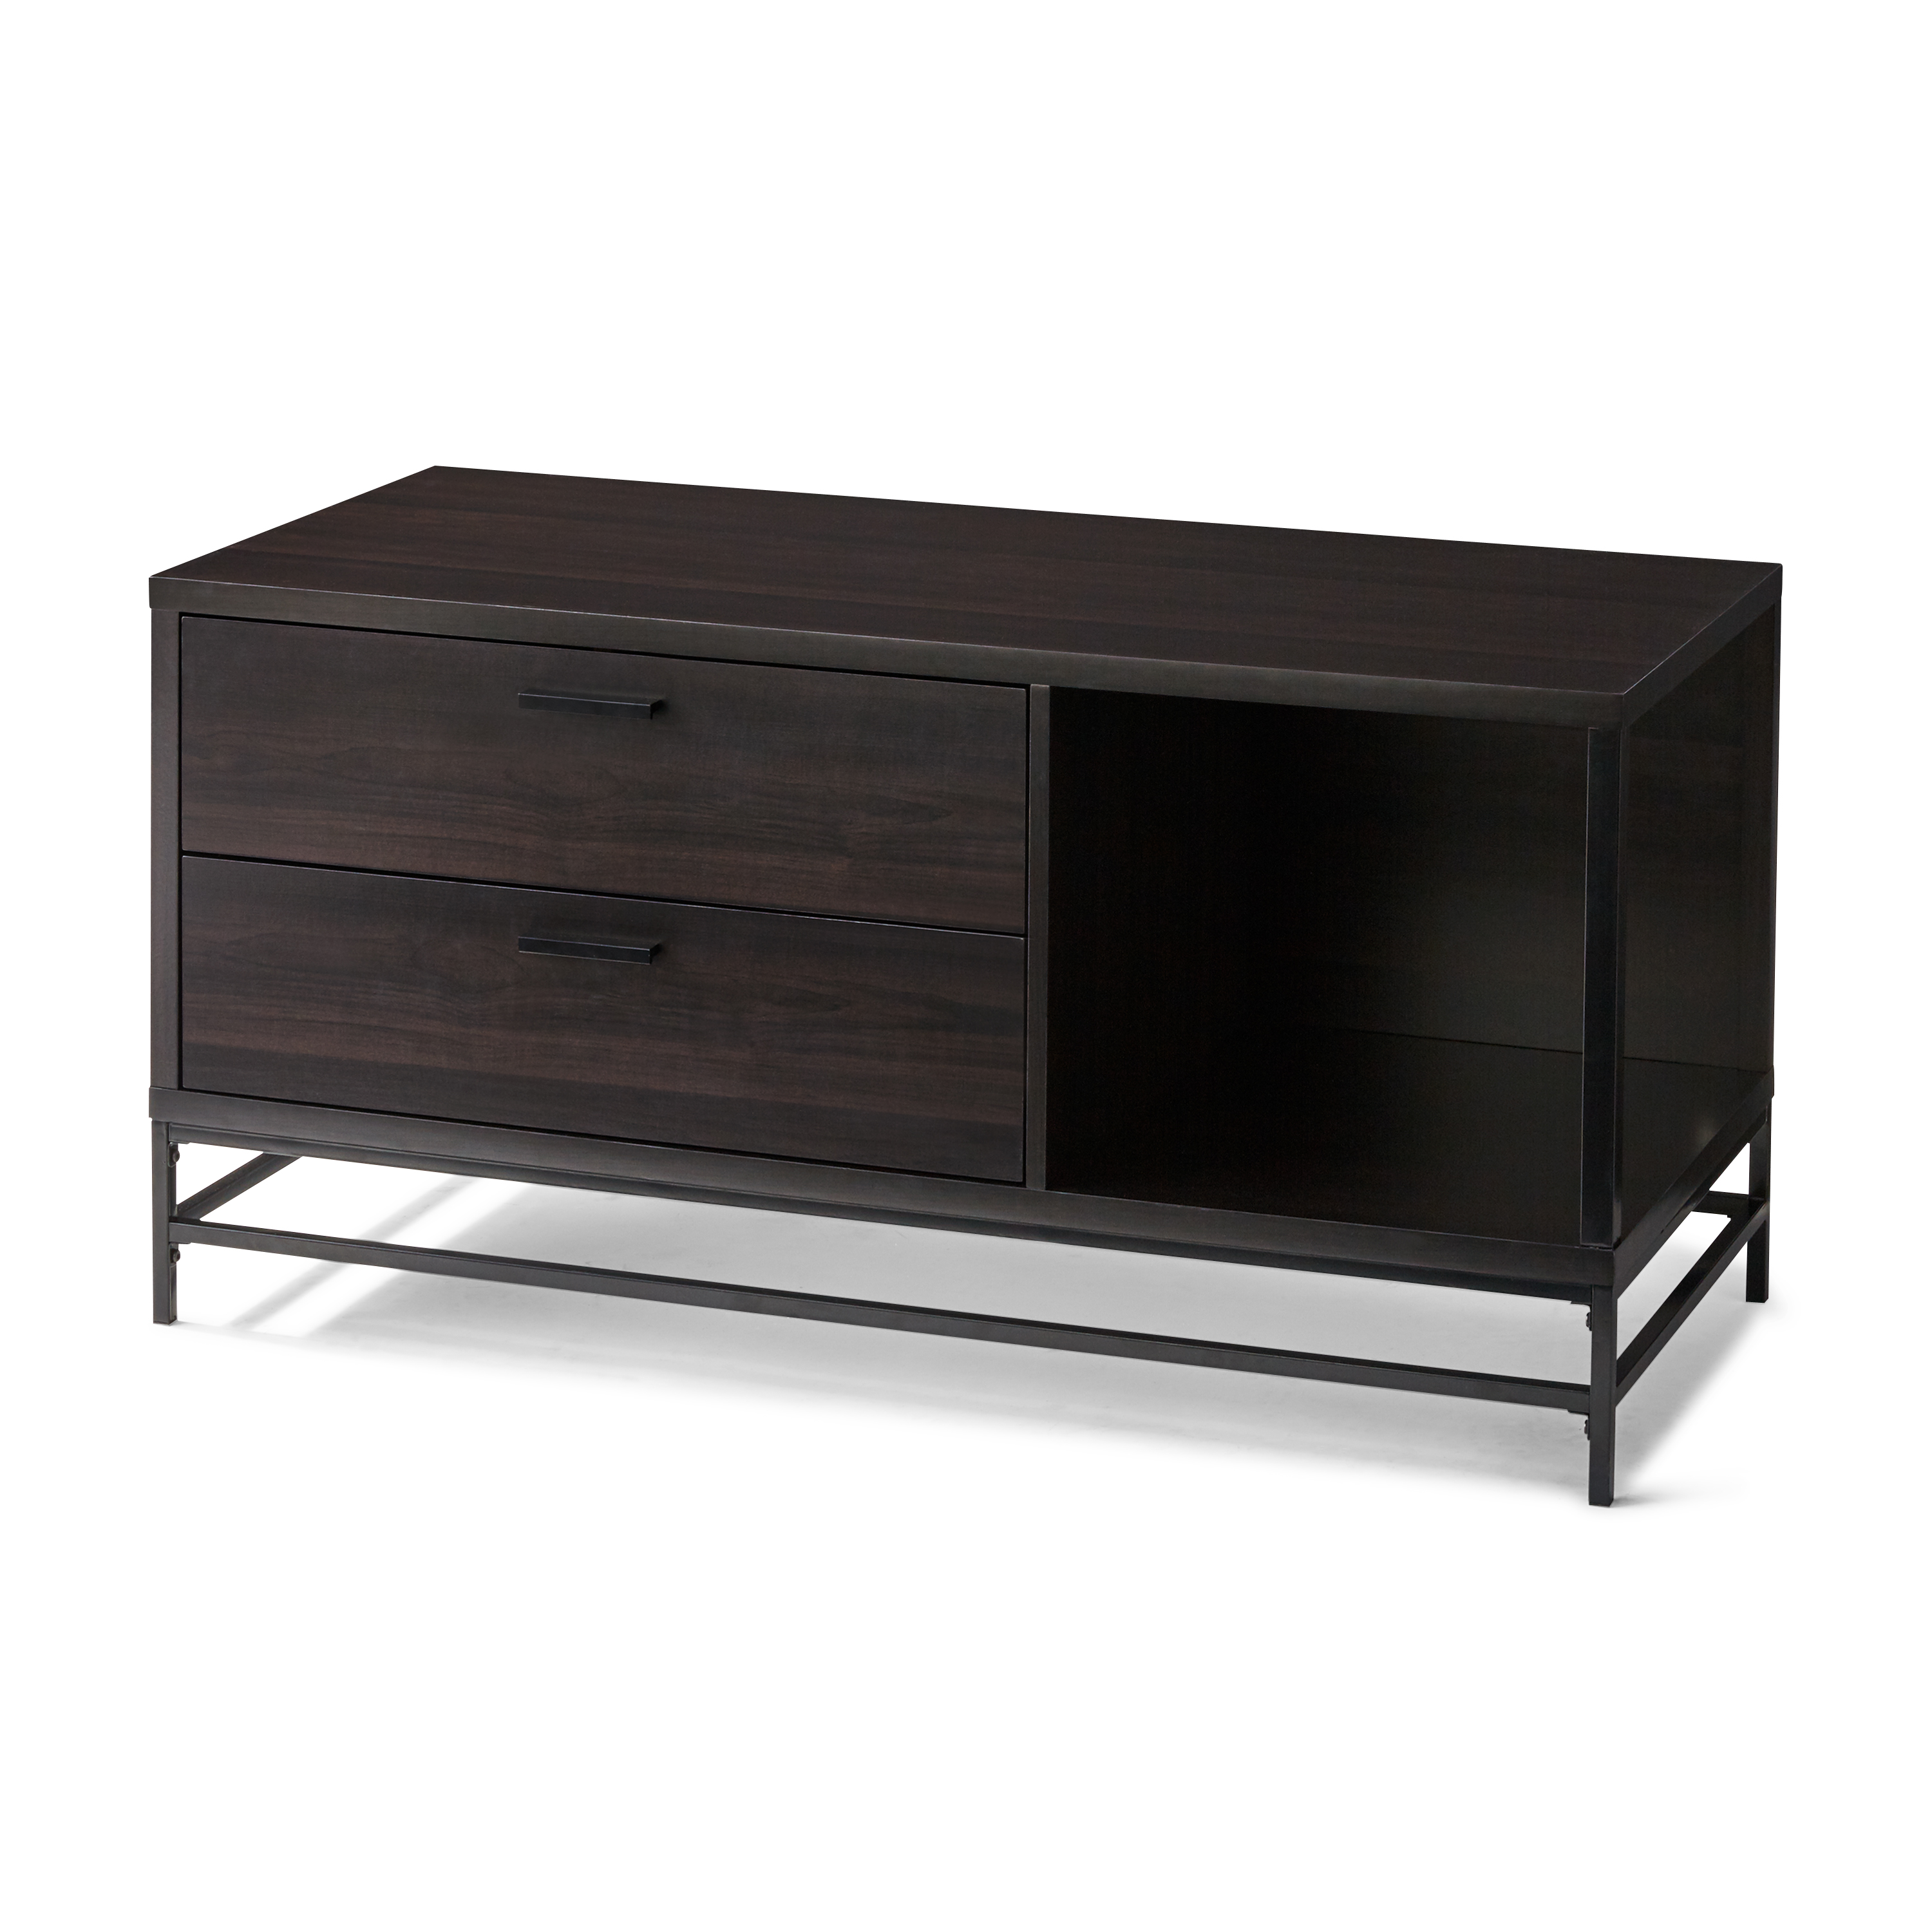 Mainstays Wood and Metal TV Stand for TVs up to 55", Espresso - image 3 of 4